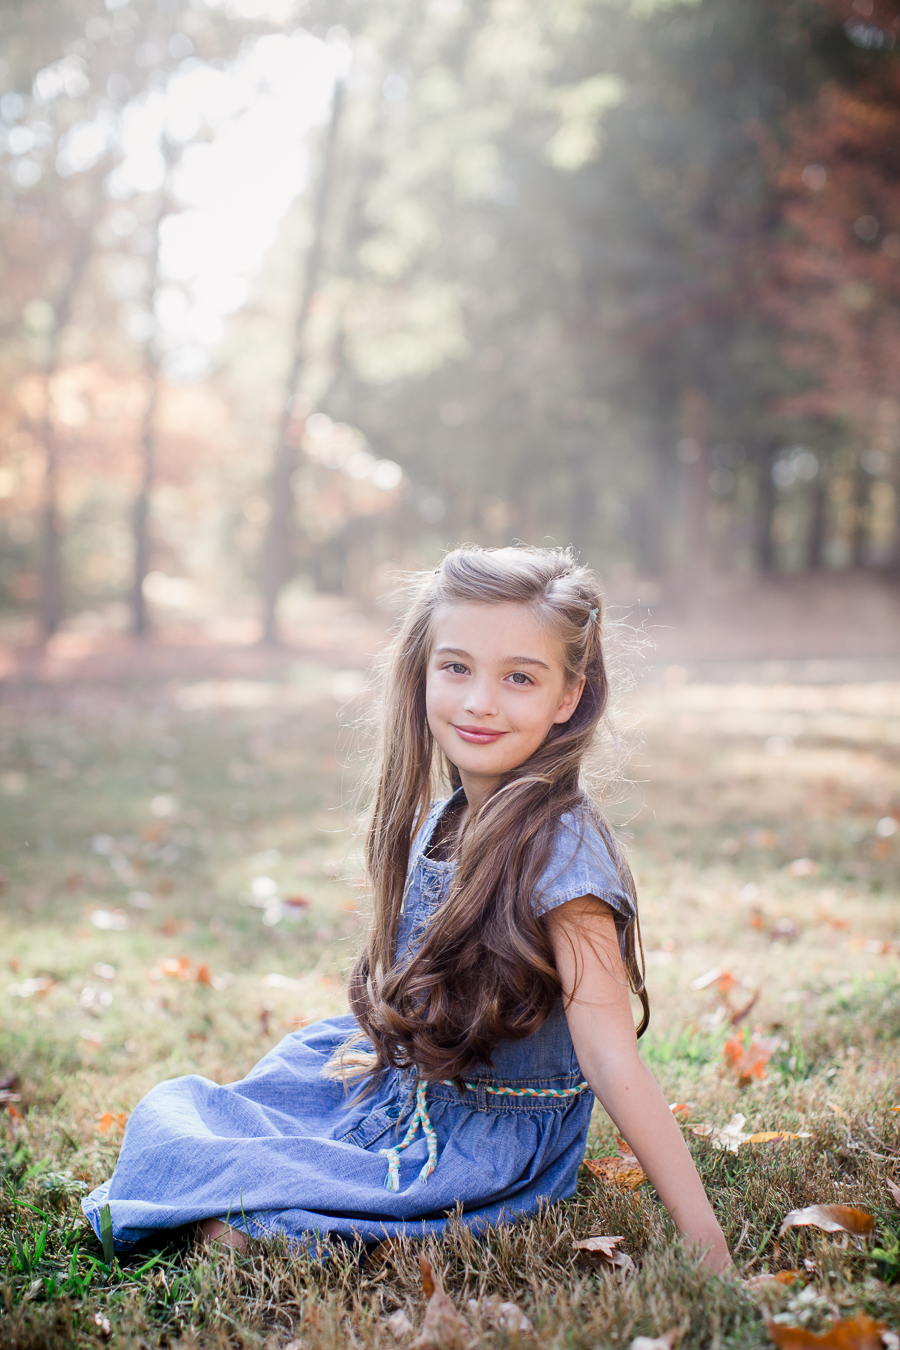 Little girl with awesome hair by Knoxville Wedding Photographer, Amanda May Photos.